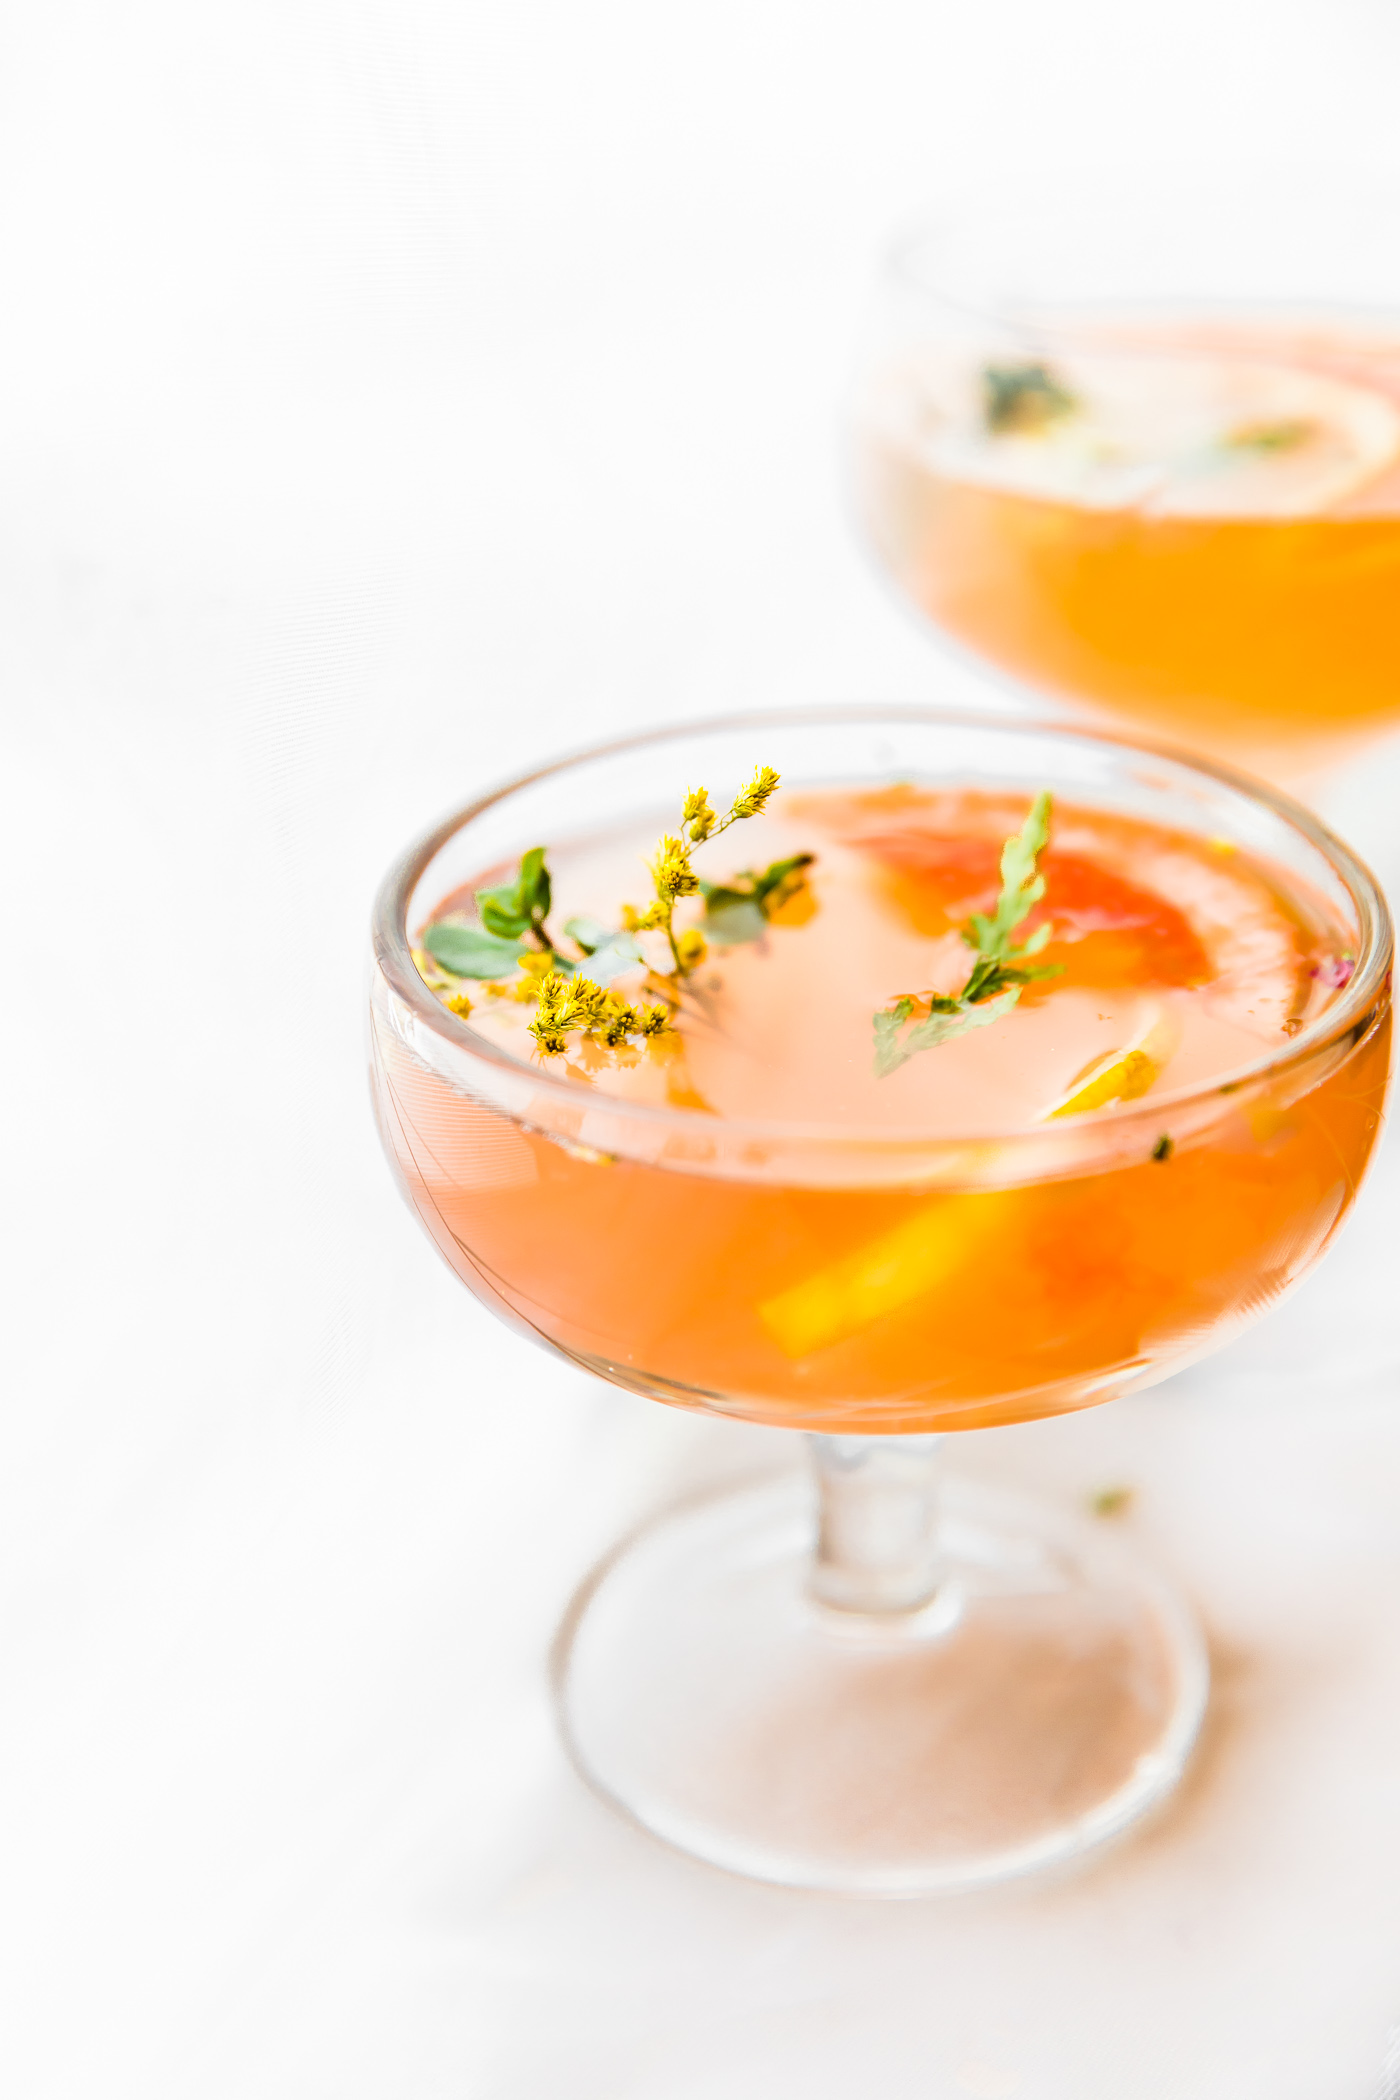 Two glasses filled with Paloma cocktail, topped with orange slices and small flowers.